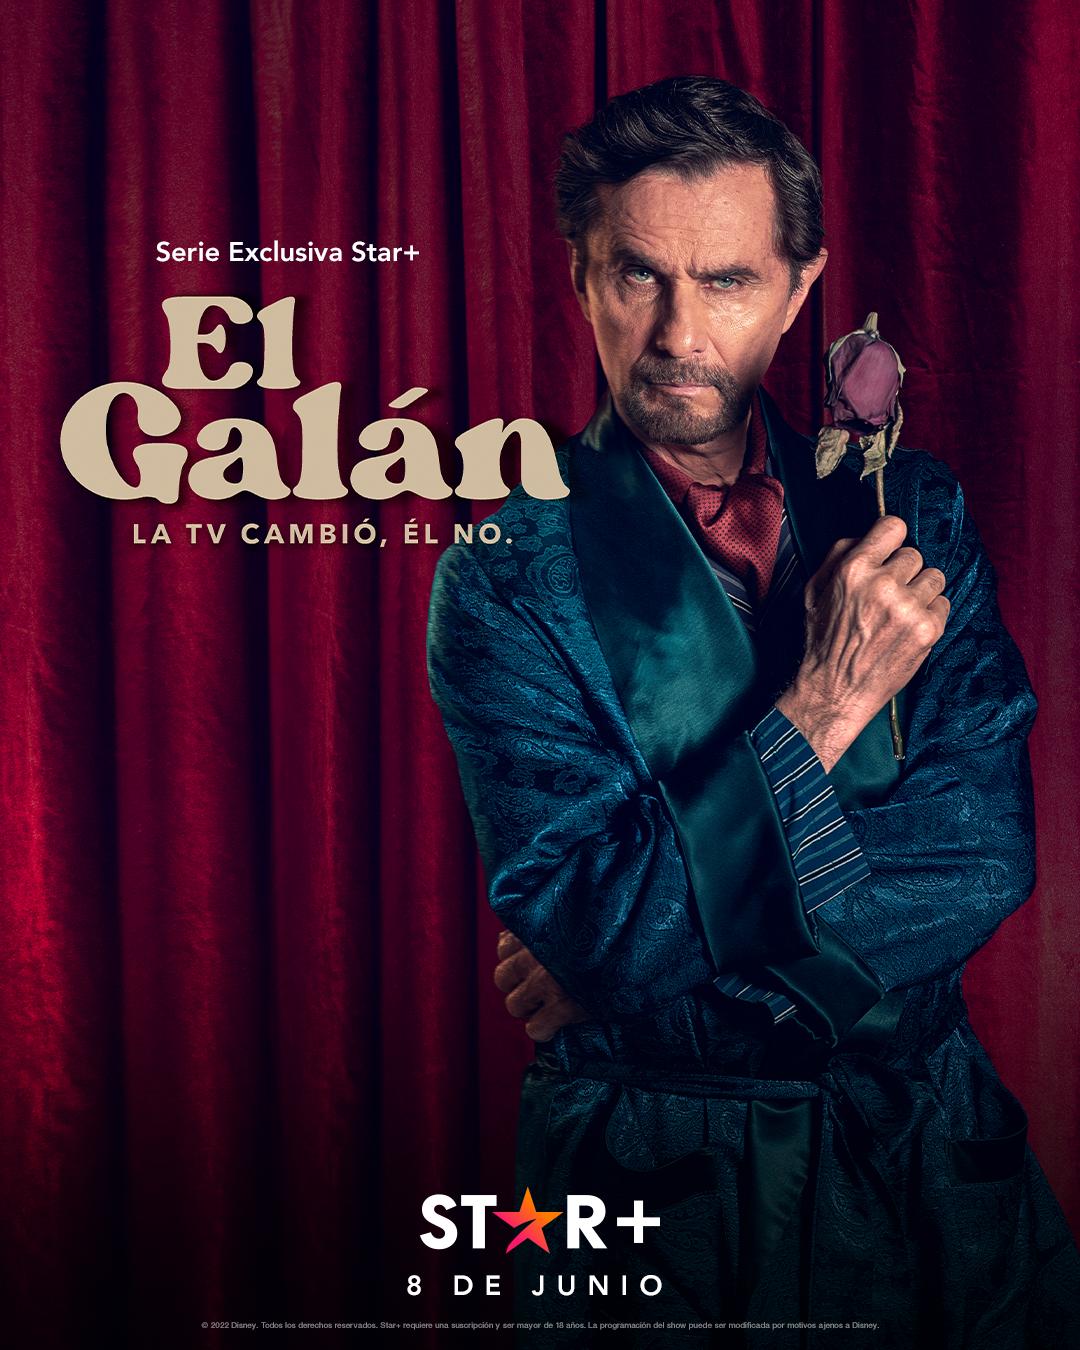 TV ratings for The Gallant. TV Changed, He Didn't (El Galán. La Tv Cambió, Él No) in Netherlands. Star+ TV series